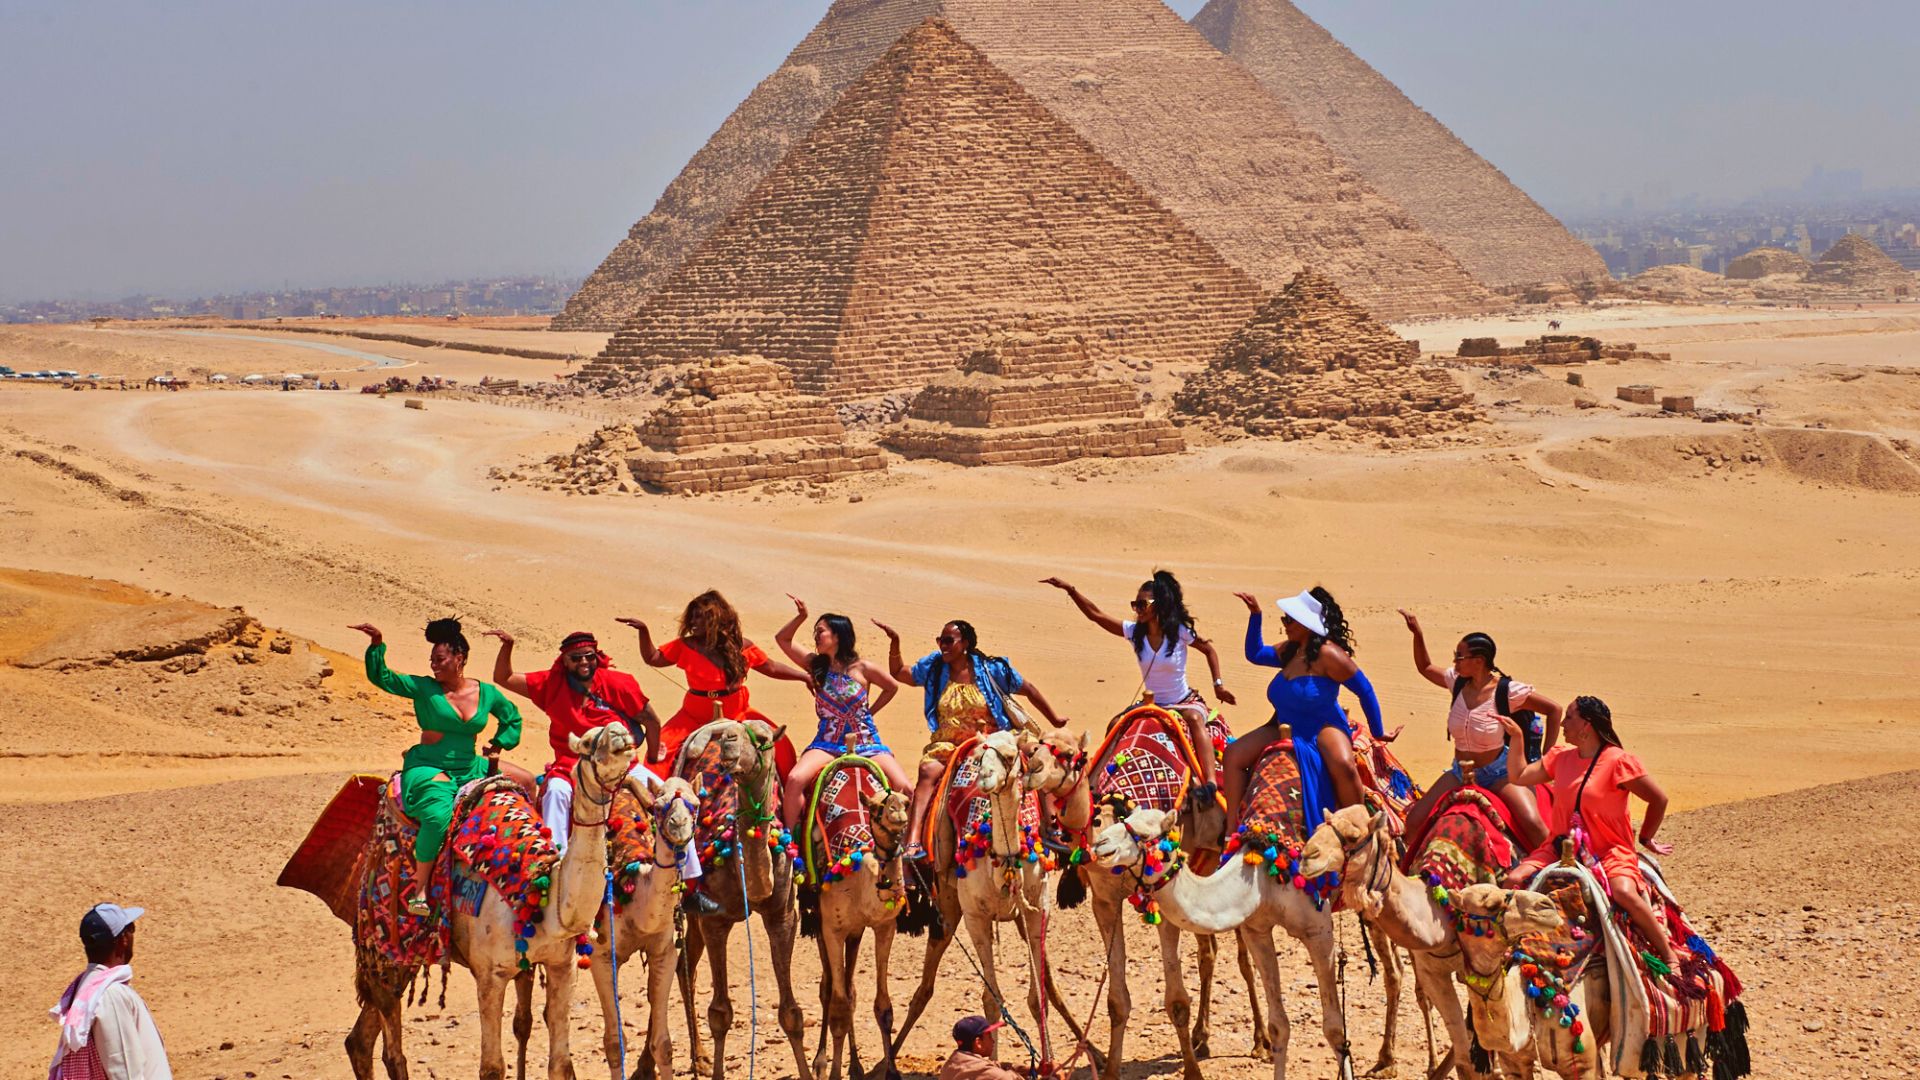 Black Travel Fest Egypt 2022 Group Trip - Giza Pyramids and Camels